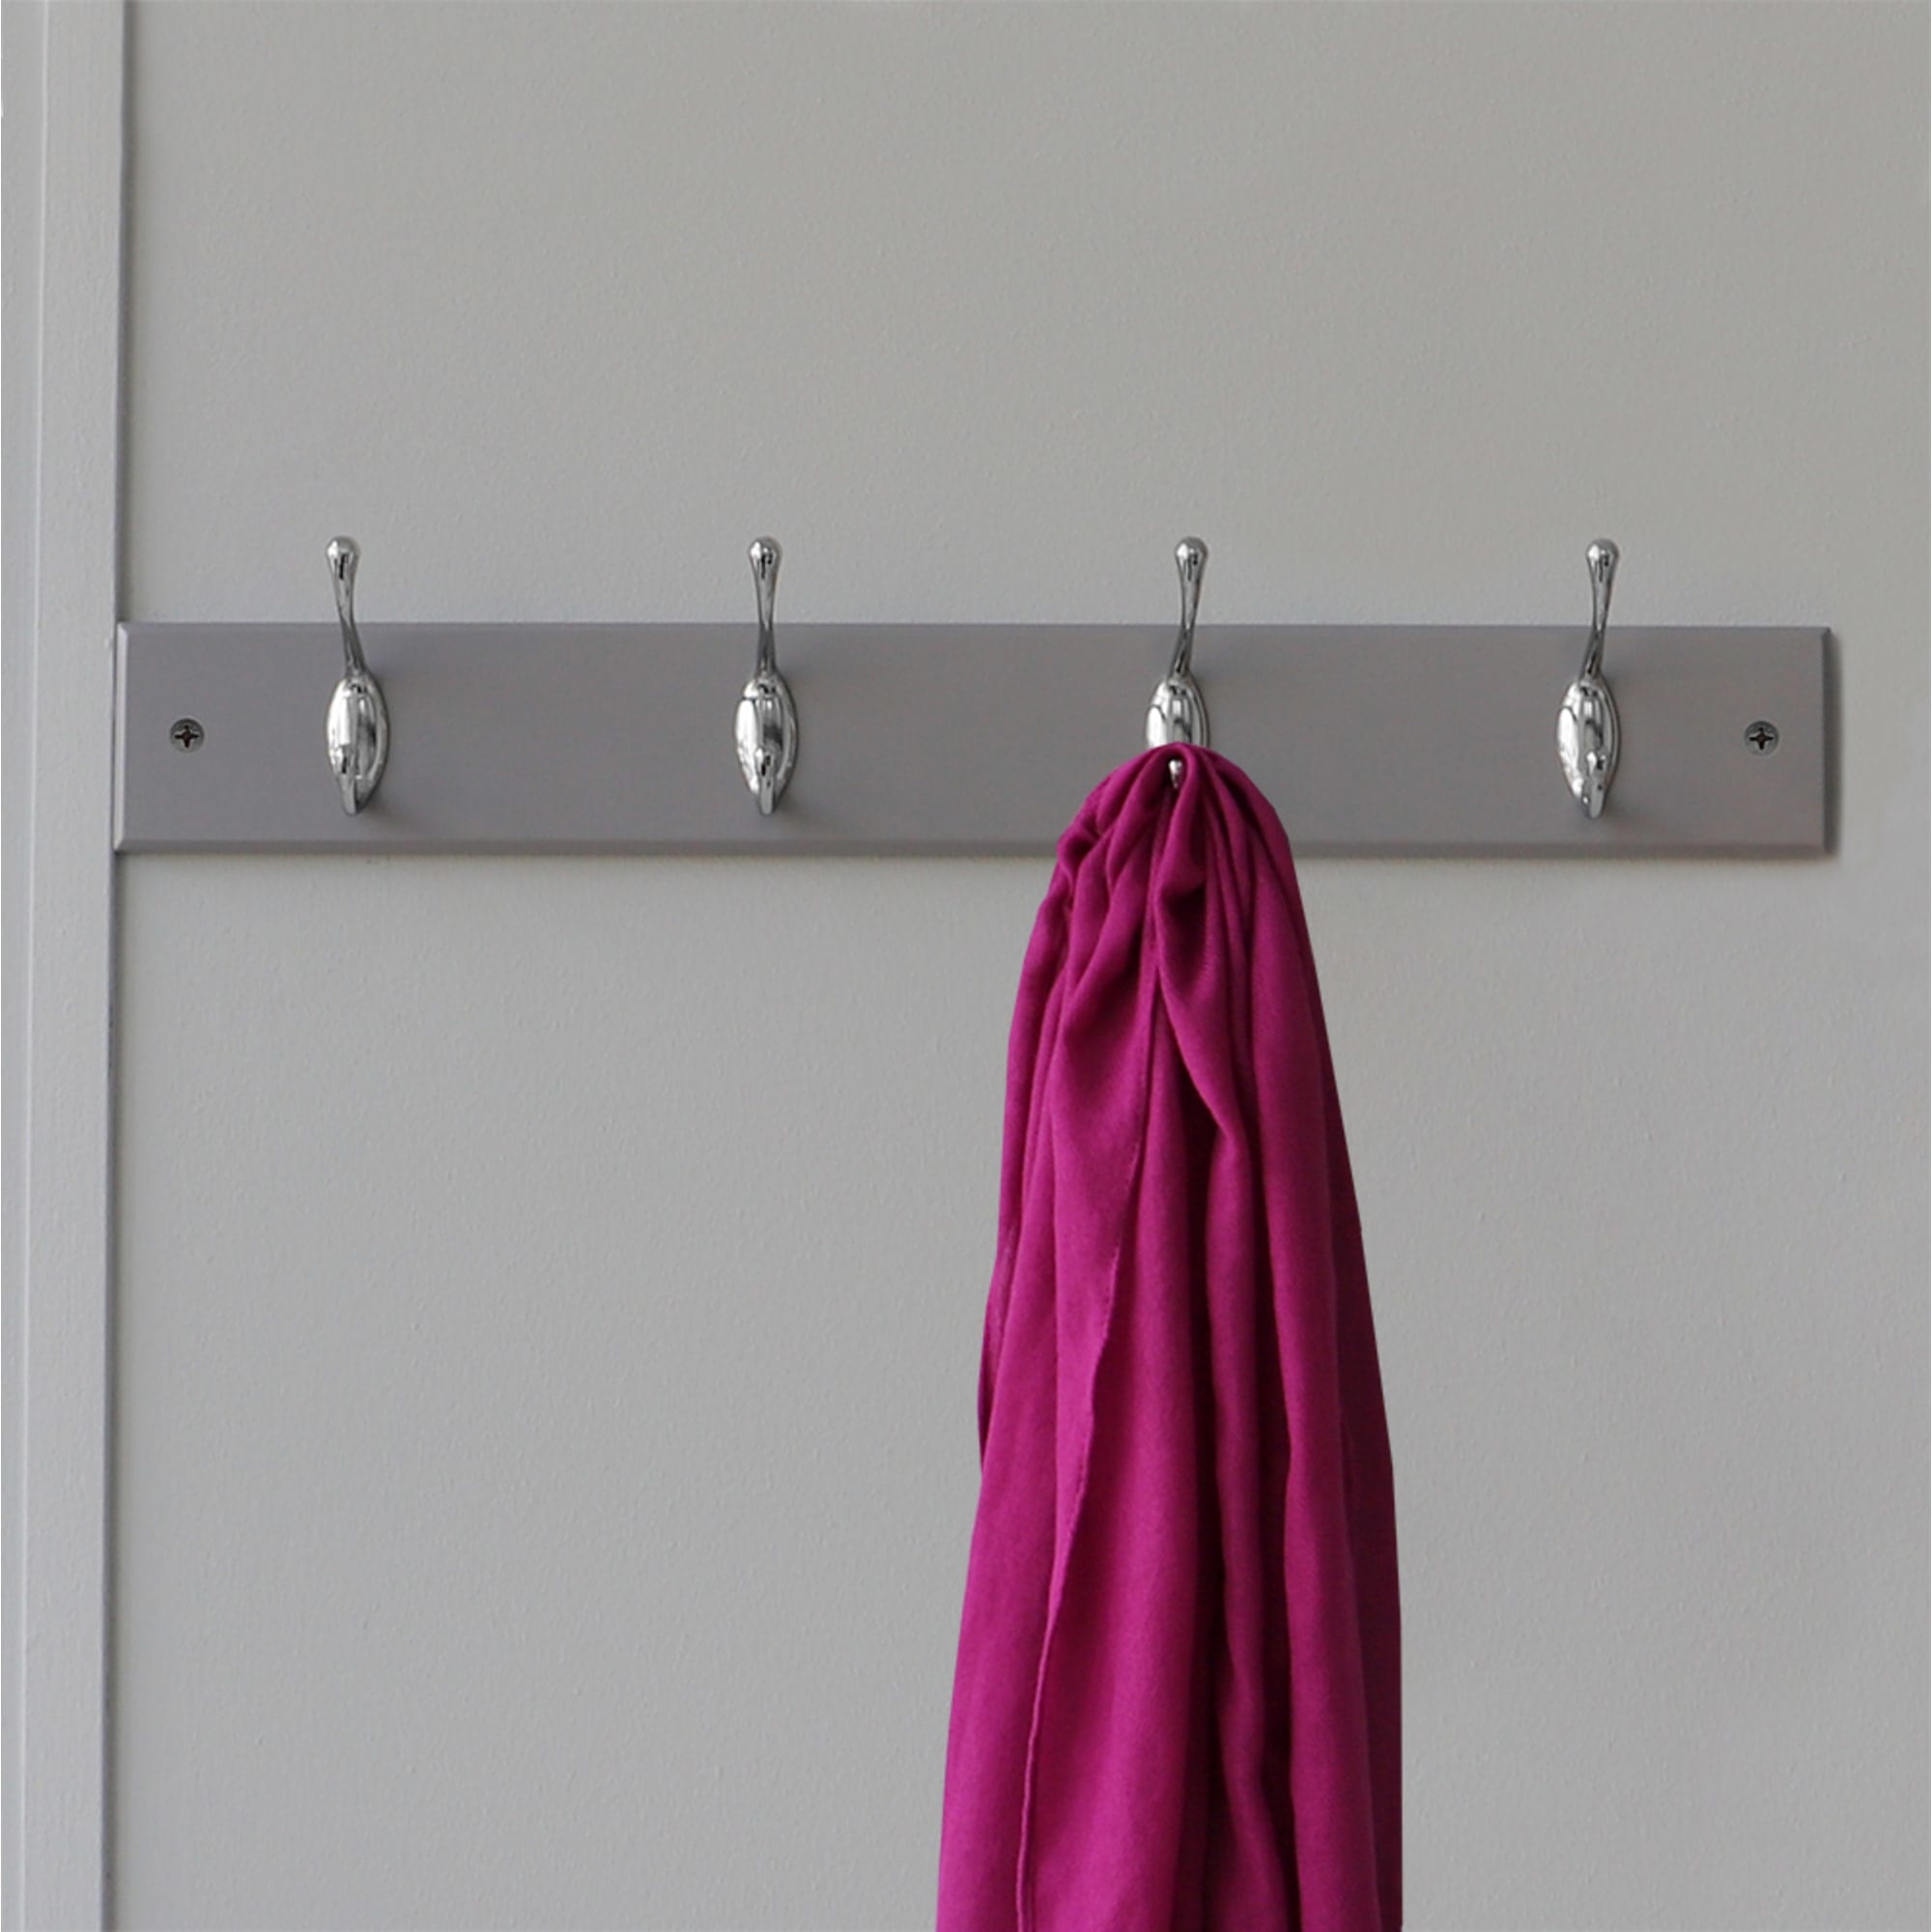 Home Basics 4 Double Hook Wall Mounted Hanging Rack, Grey $10.00 EACH, CASE PACK OF 12